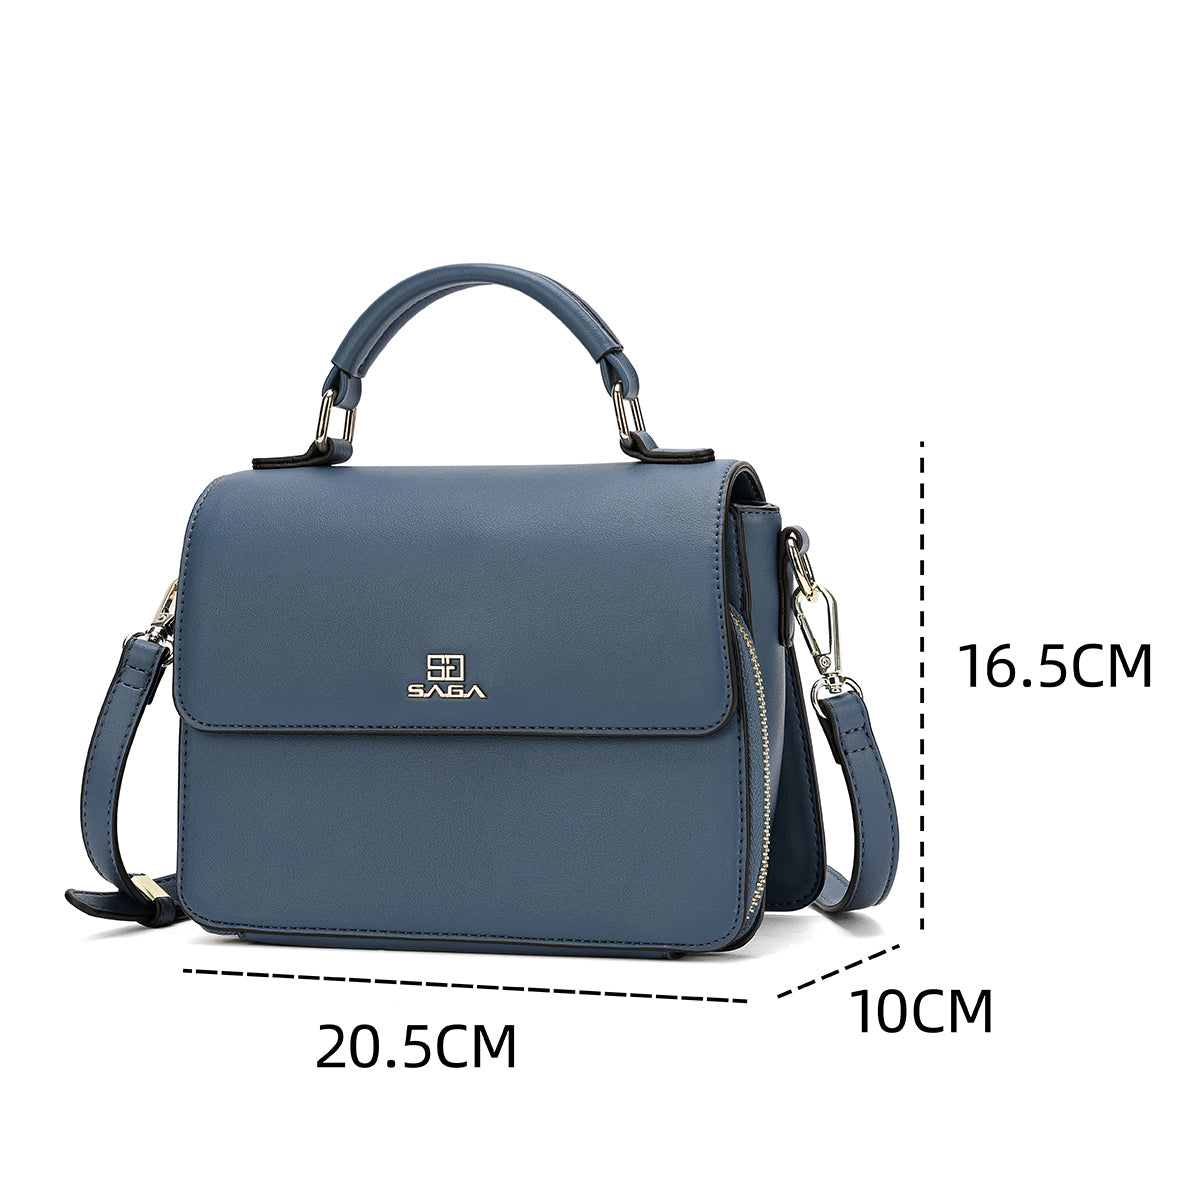 Saga Women's Handbag with Detachable Strap 20.5cm Wide Available in Two Colors